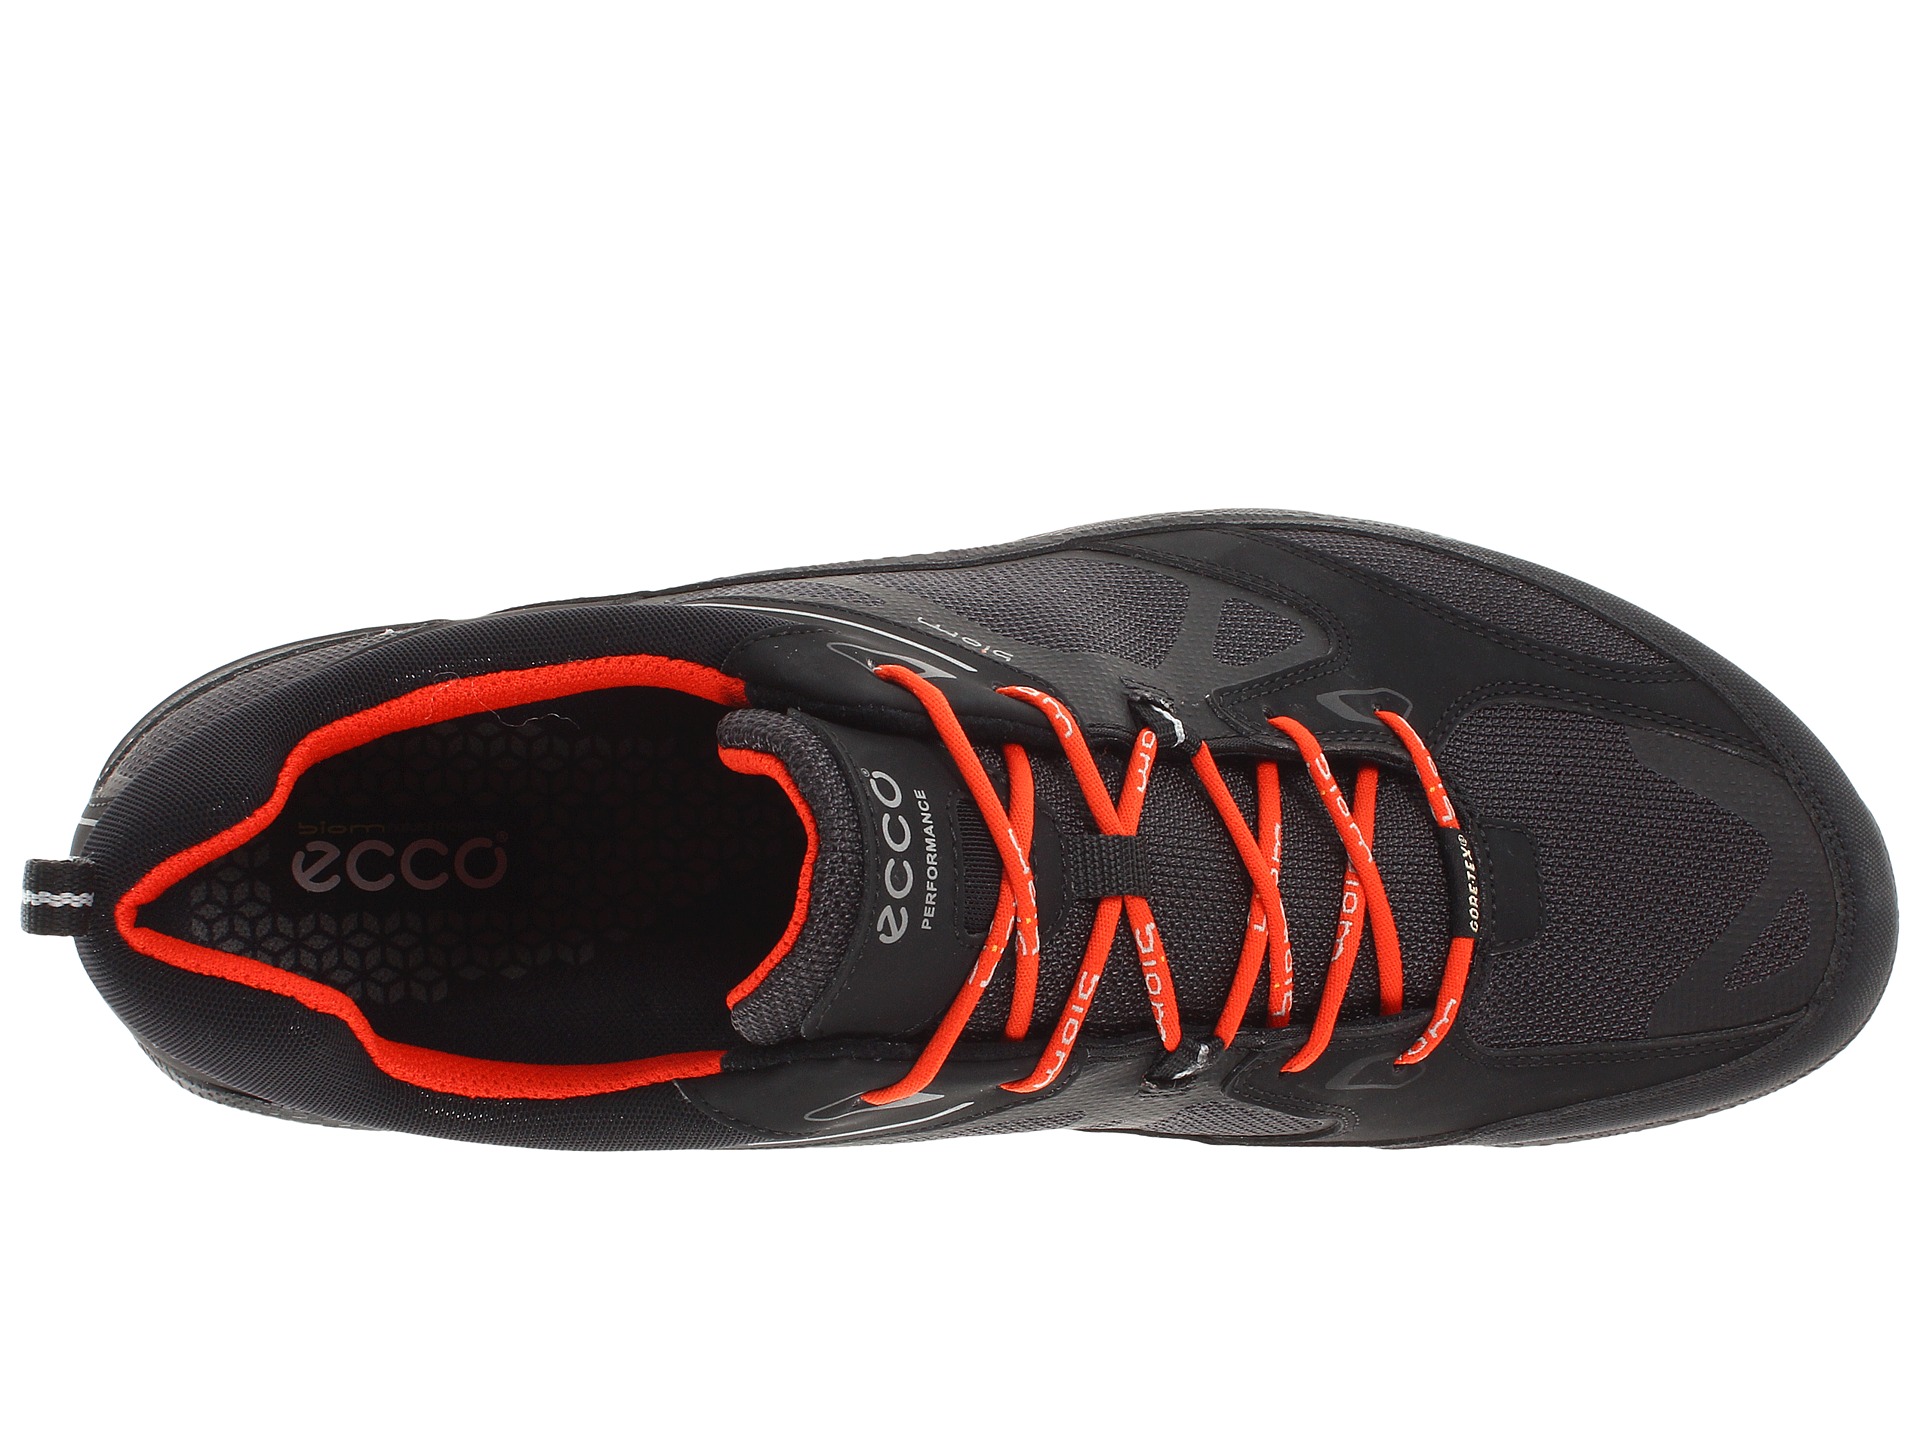 Ecco Sport Quest Gtx, Shoes | Shipped Free at Zappos